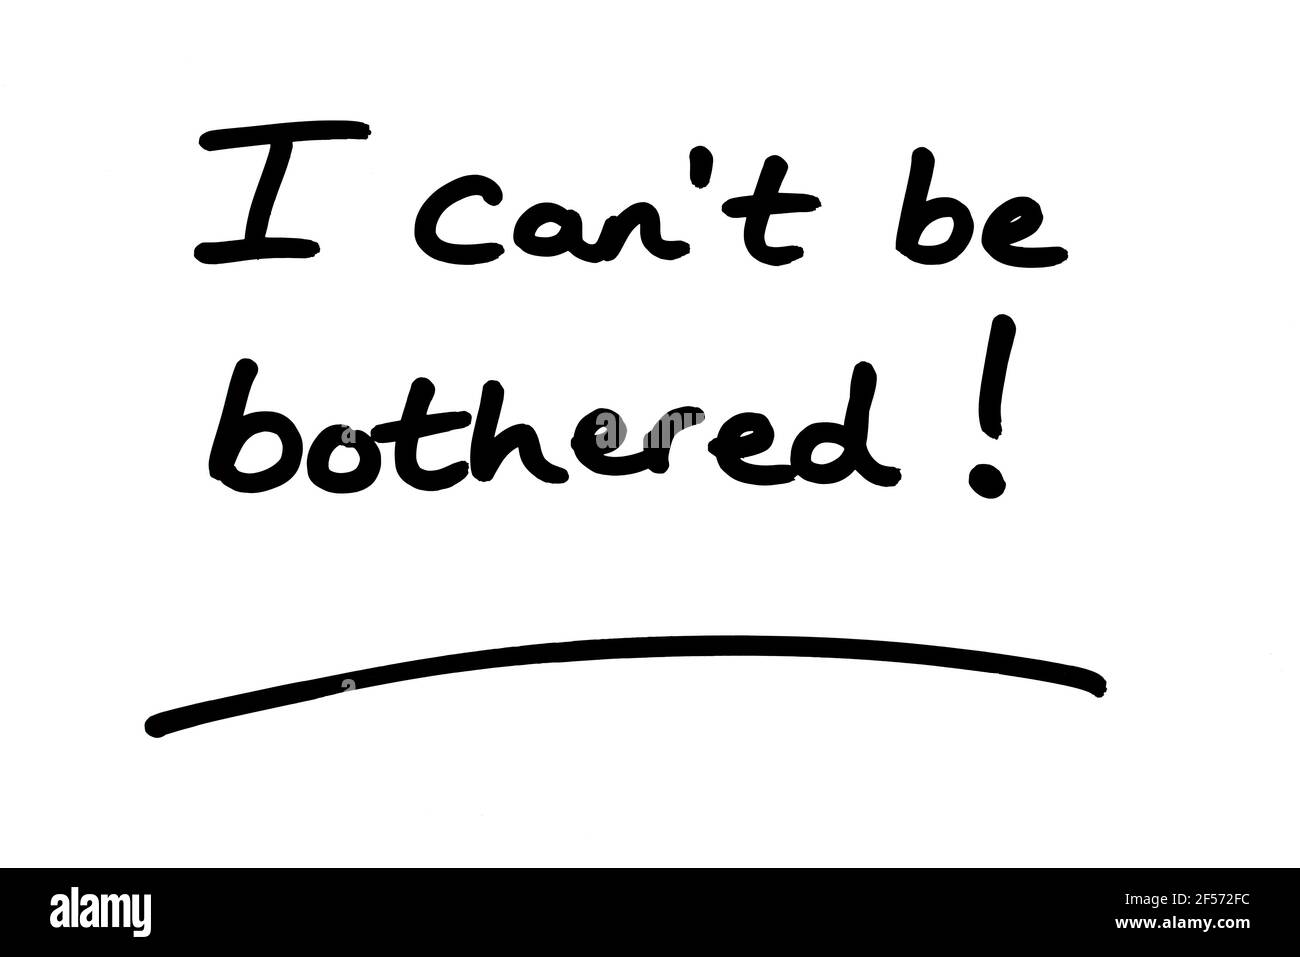 I cant be bothered! handwritten on a white background. Stock Photo